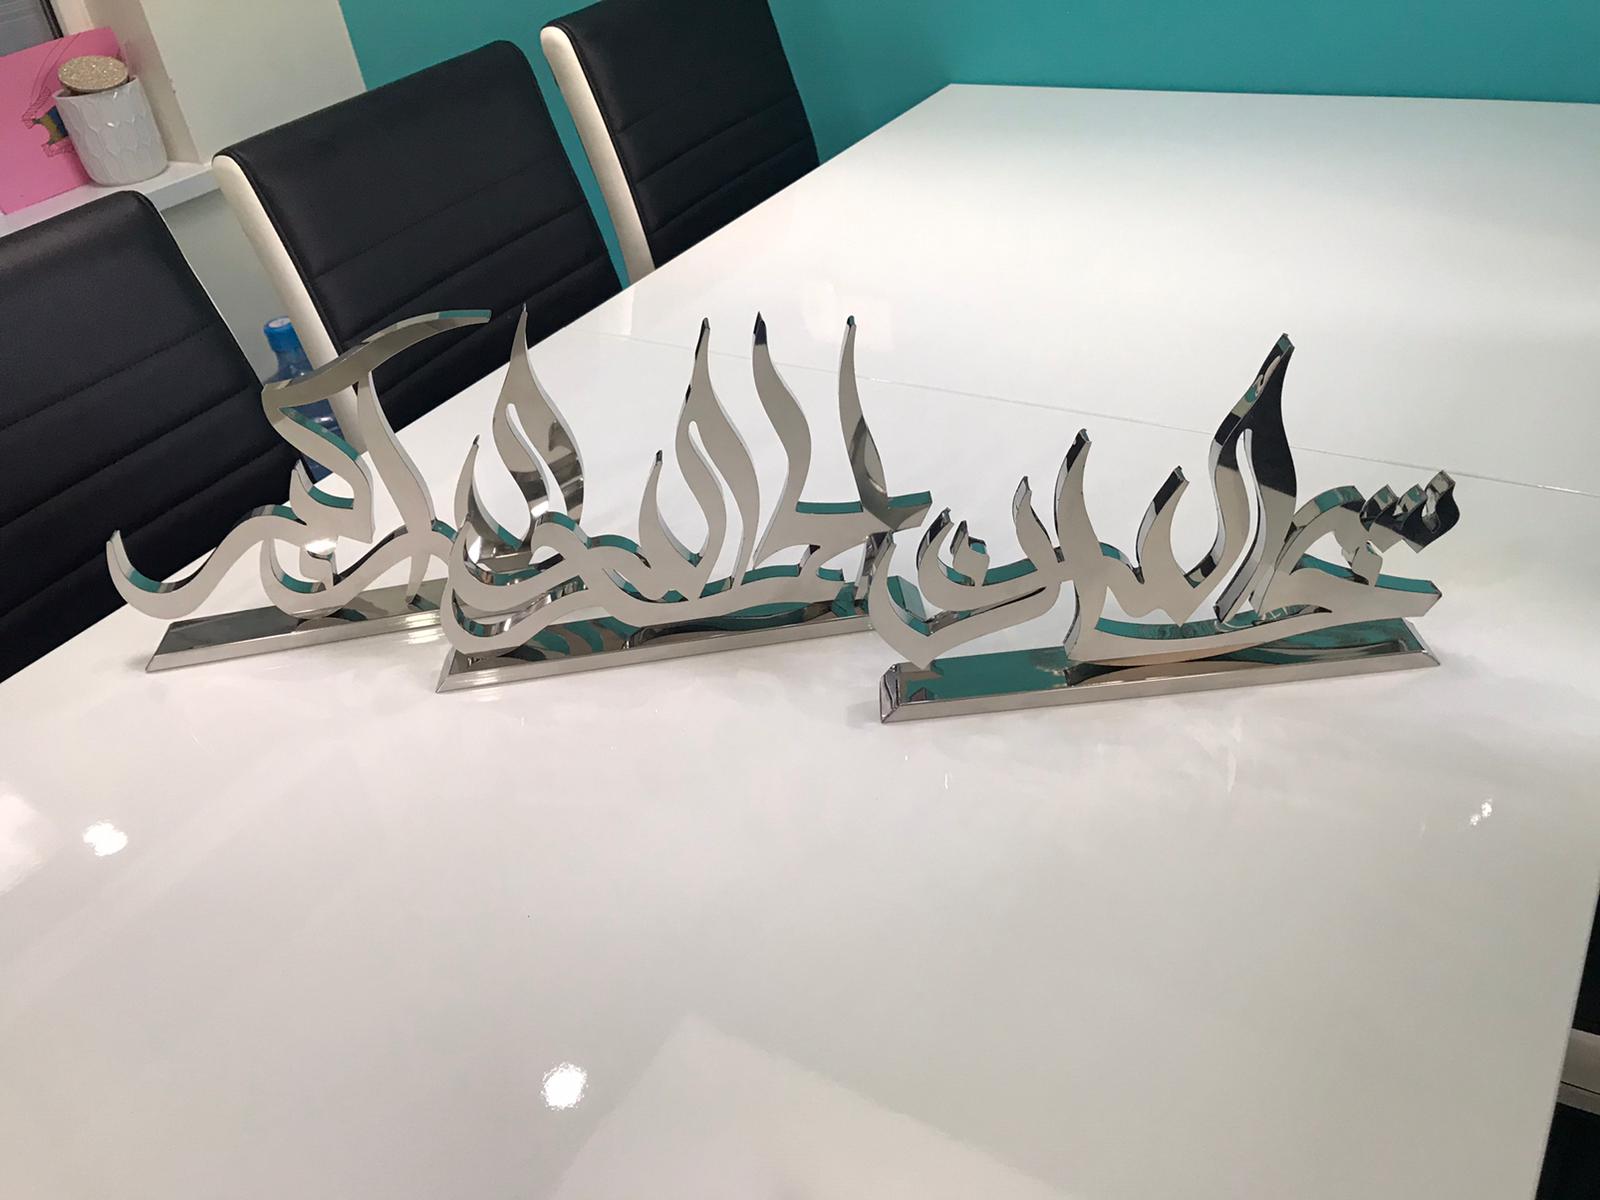 Subhan Allah Table Art 3D Stainless Steel Islamic Calligraphy